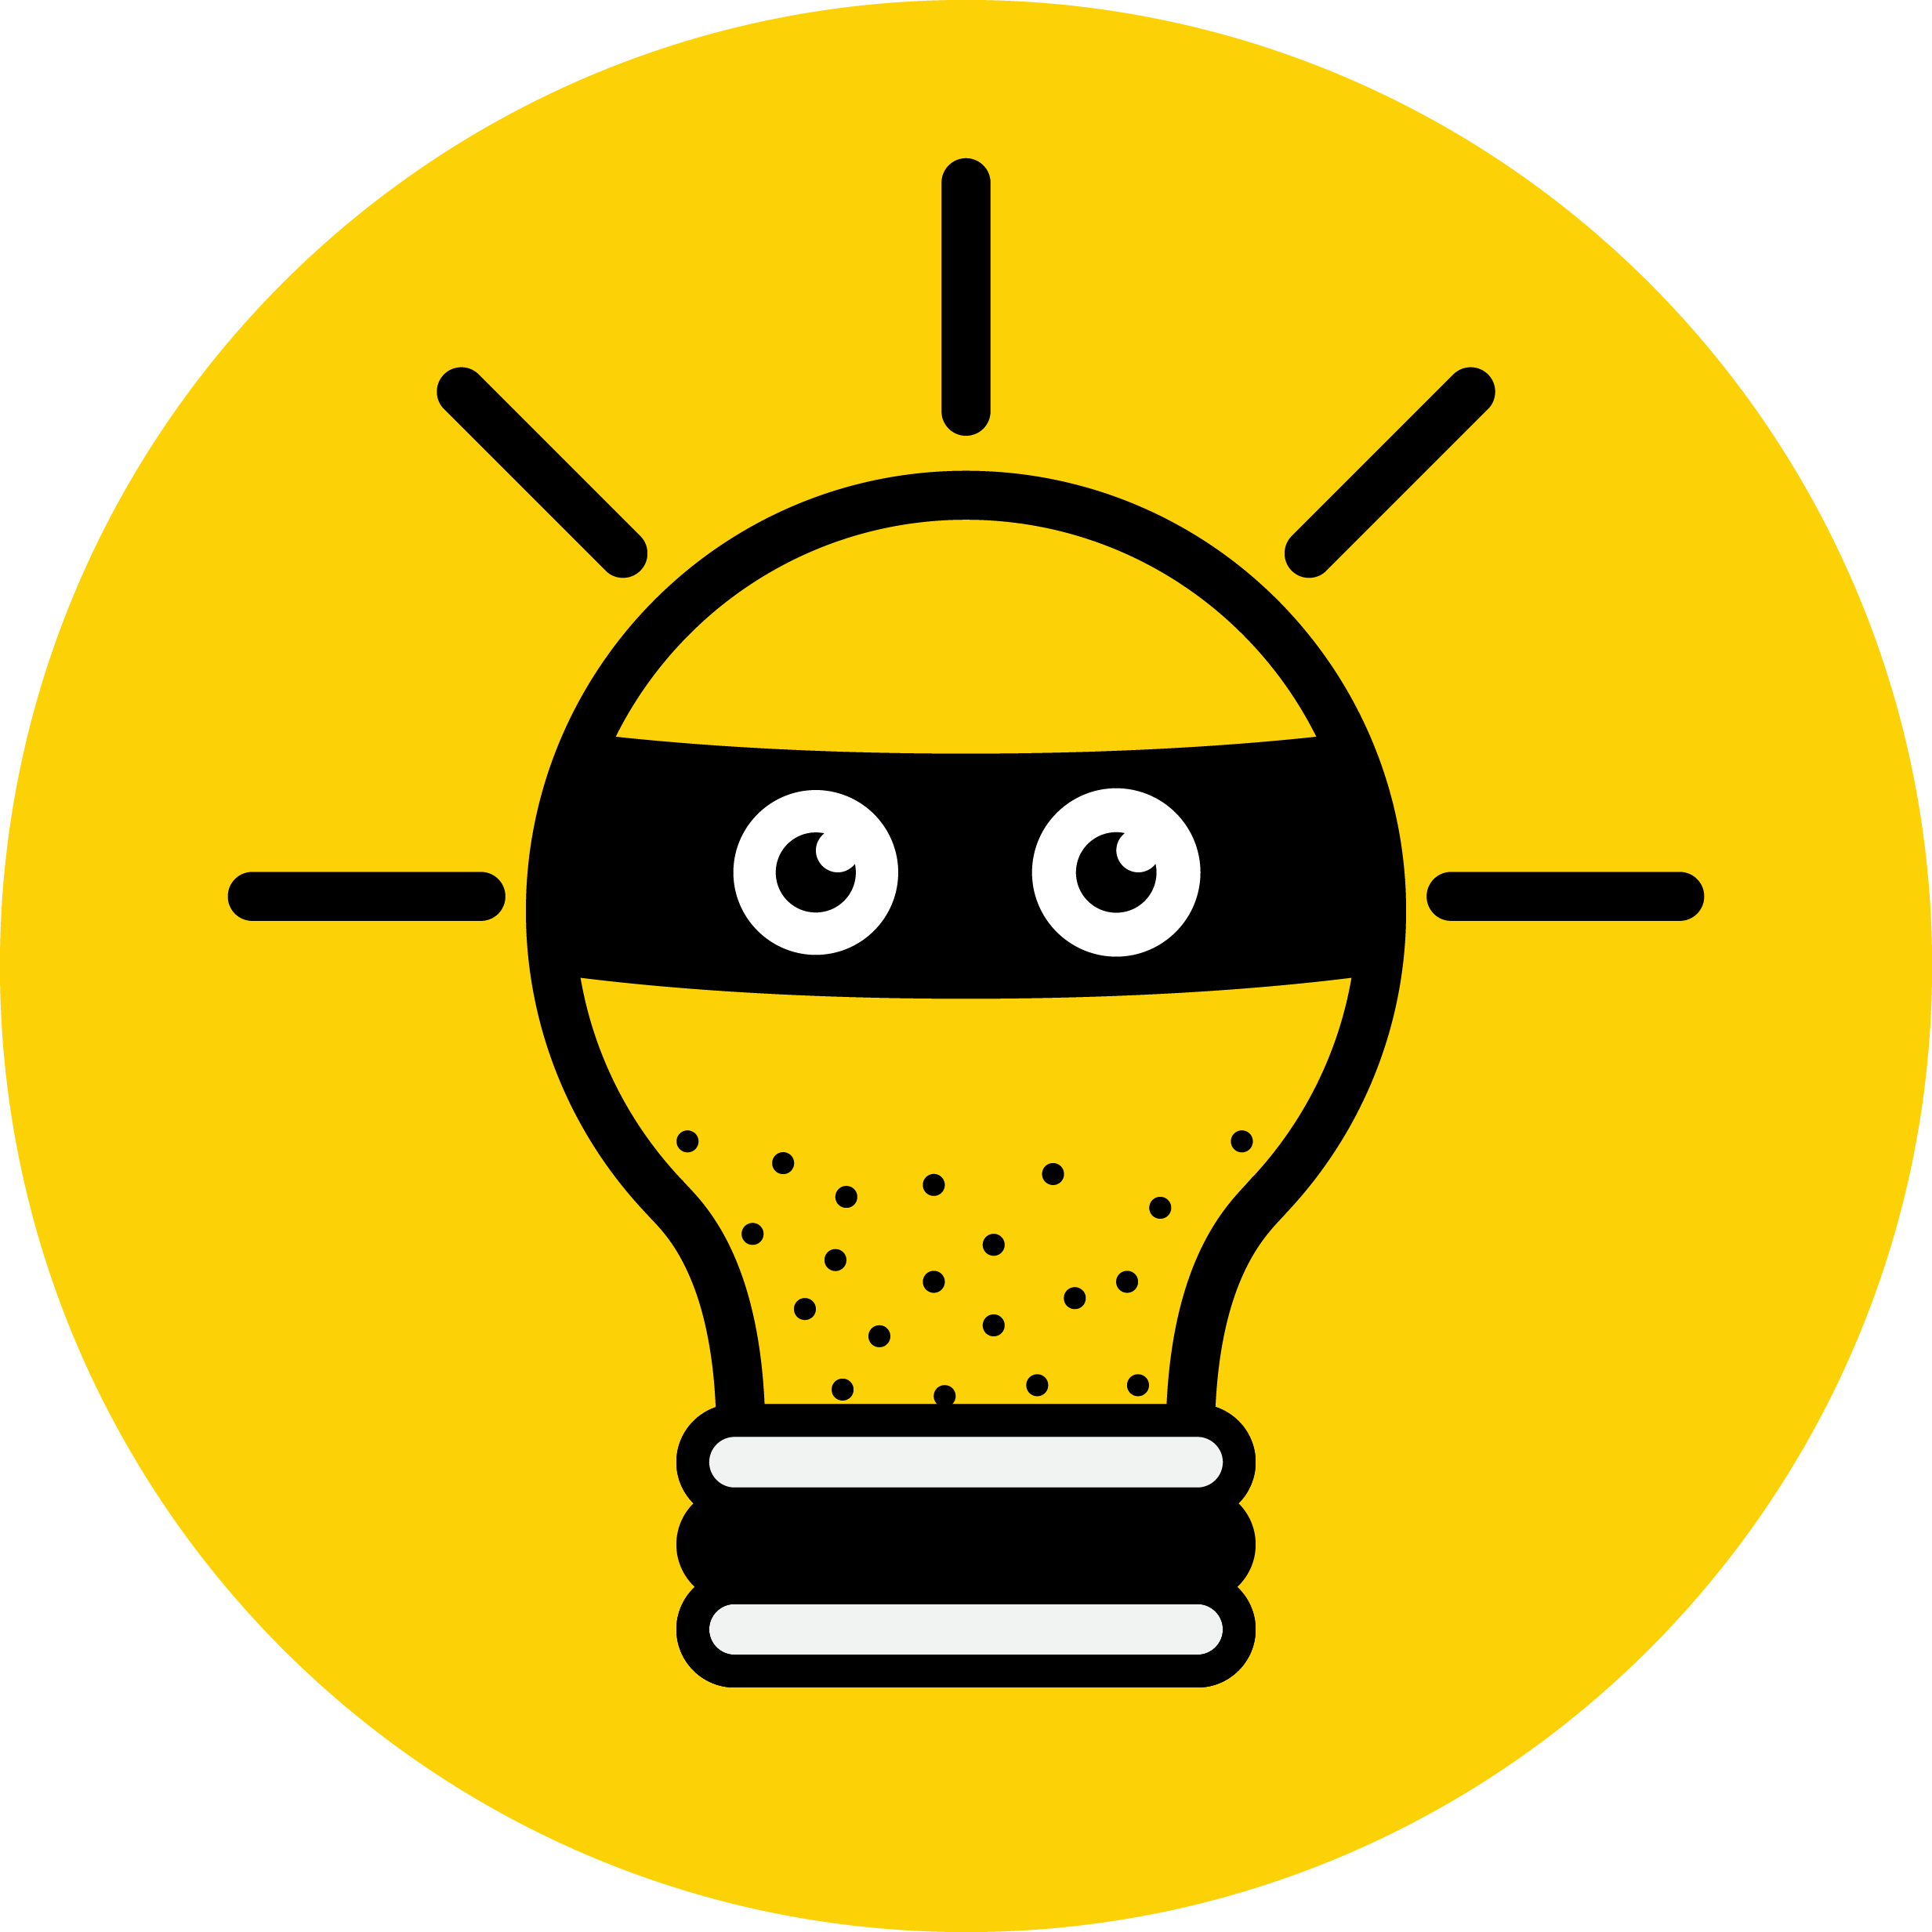 A Yellow Circle With A Light Bulb And Eyes